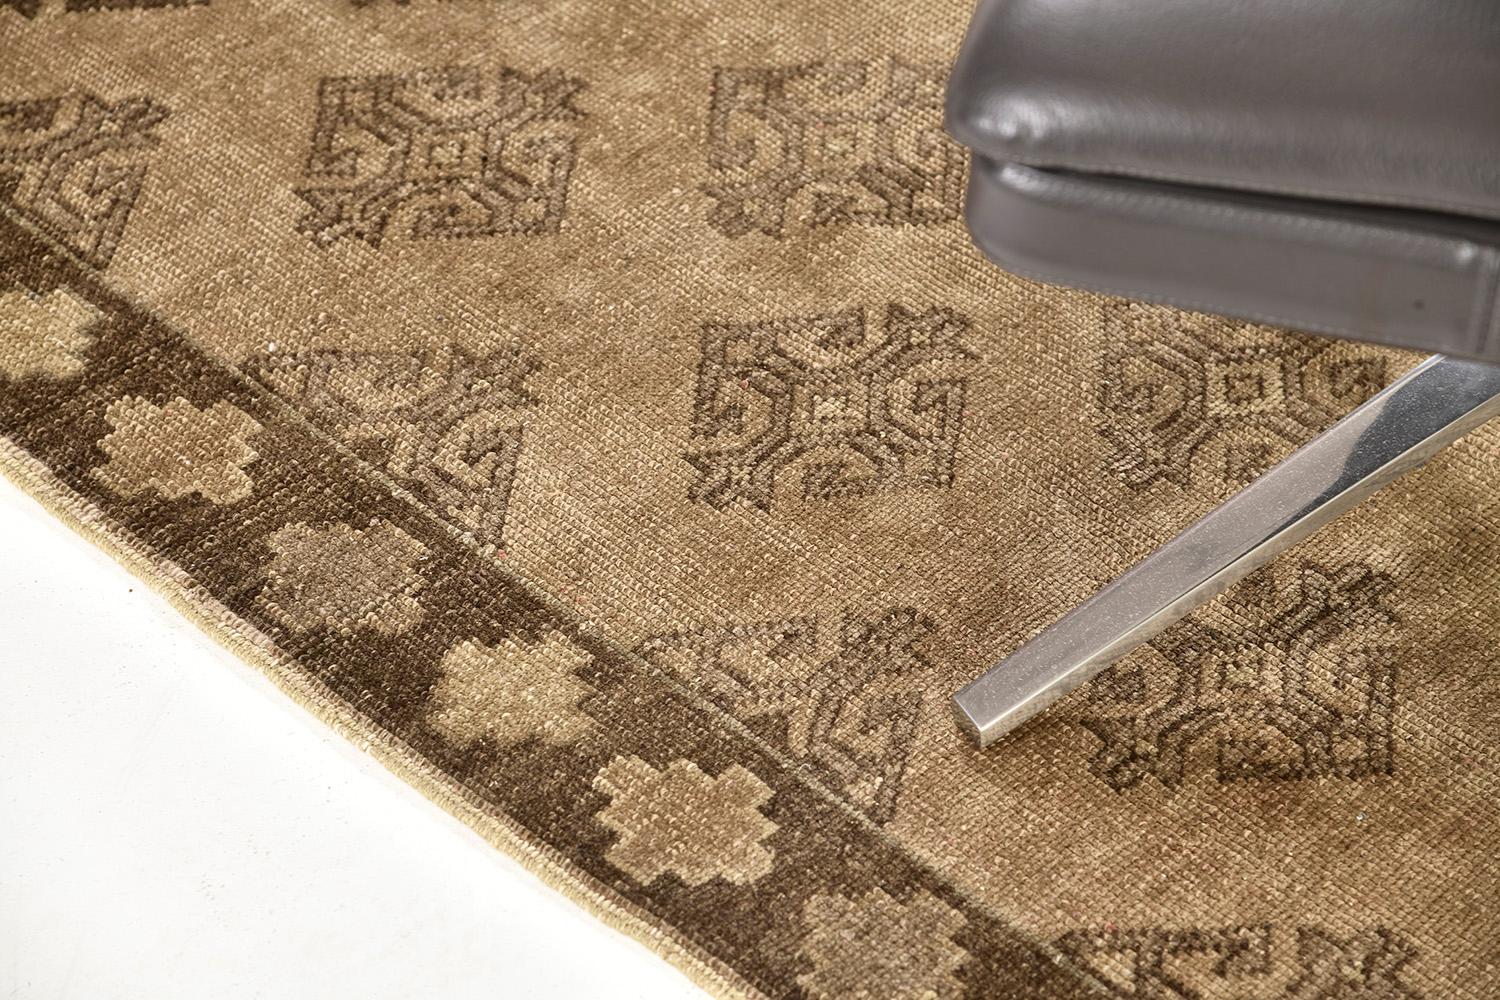 This phenomenal Turkish Anatolian Runner is perfect for your floors. It is not just for aesthetic value, but, to keep you on fashion as well. It features an array of stamp neutral colors in a vivid palette. A beautiful hand-woven pile that each